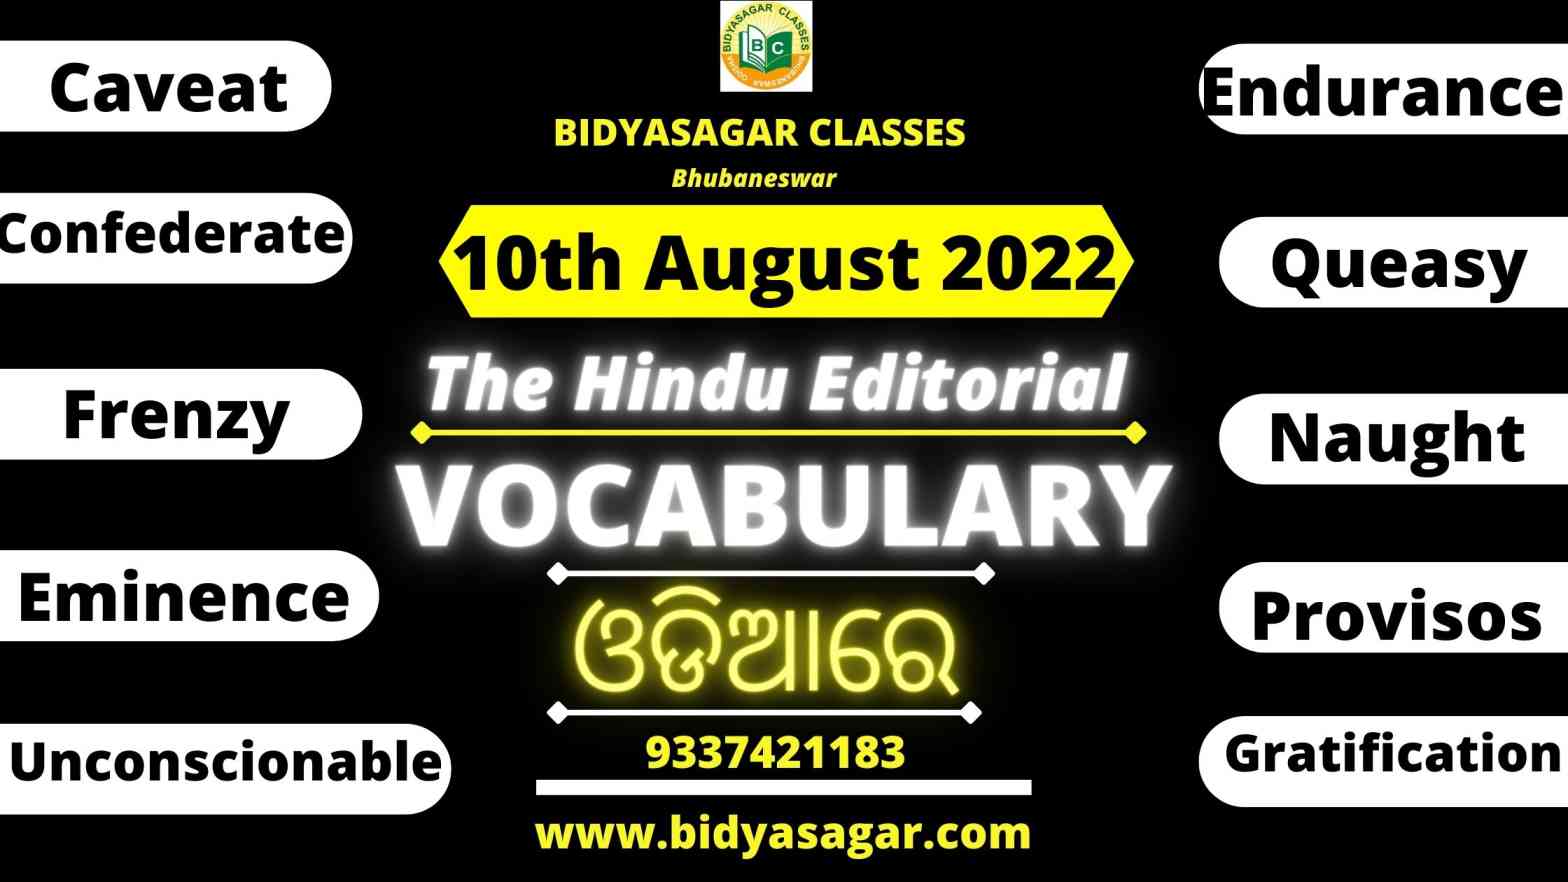 The Hindu Editorial Vocabulary of 10th August 2022